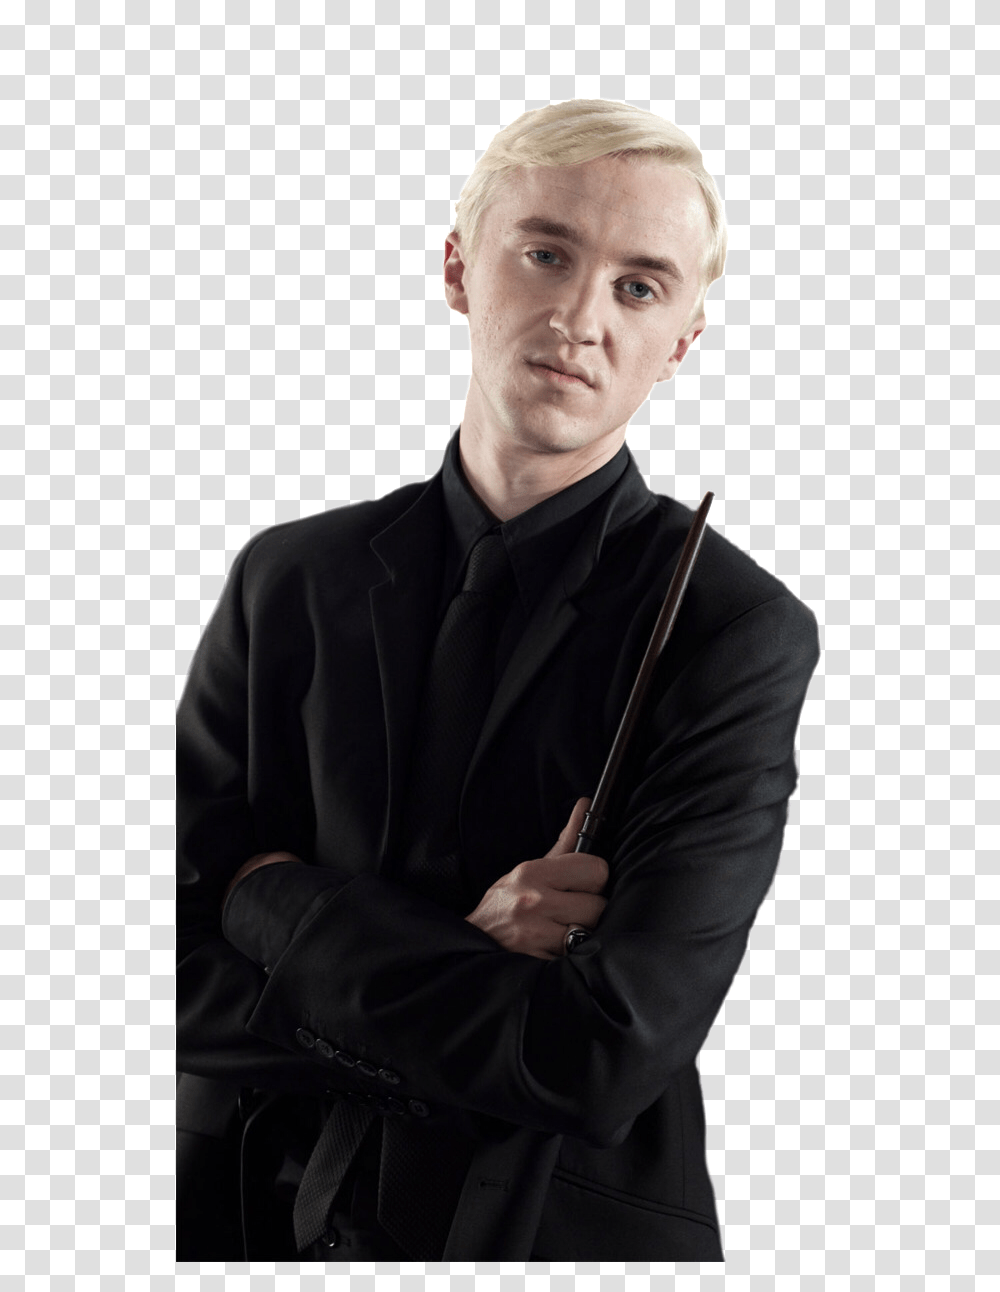 Tom Felton As Draco Malfoy From Harry Potter Draco Malfoy, Person, Suit, Overcoat Transparent Png